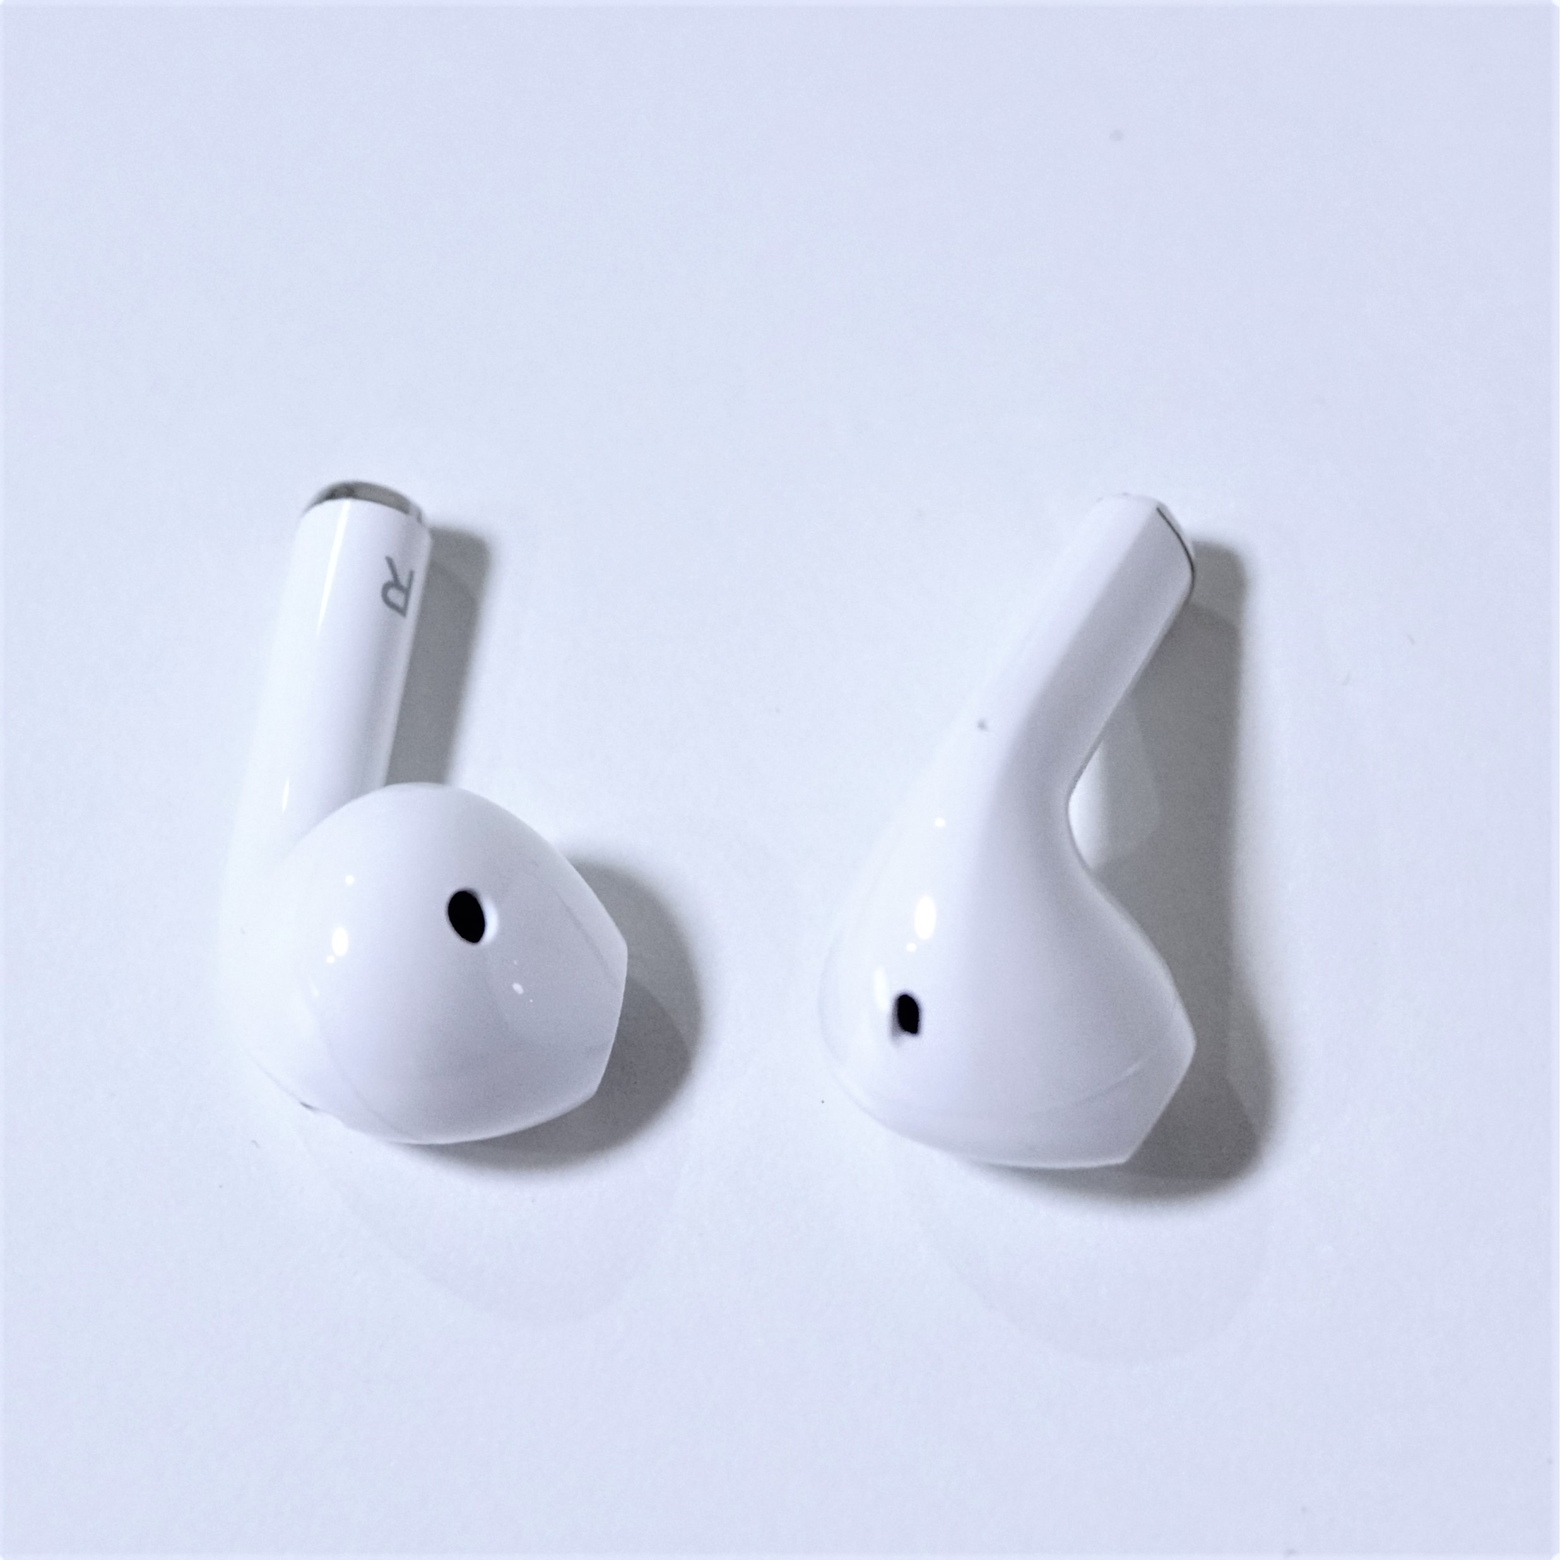 Blackview 2021 New AirBuds 3 レビュー